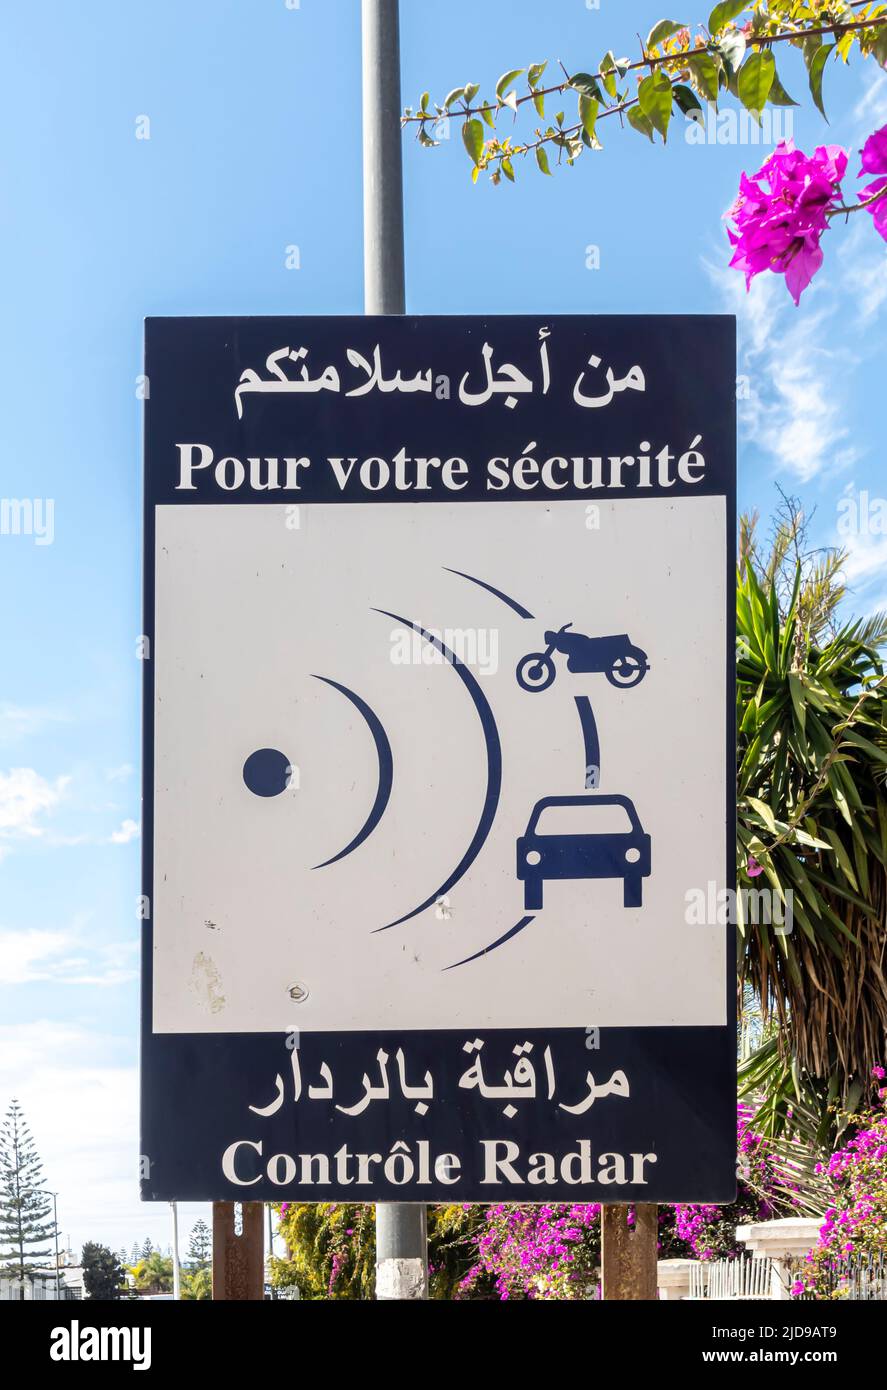 Radar control road sign warning in Arabic and French - Casablanca, Morocco Stock Photo